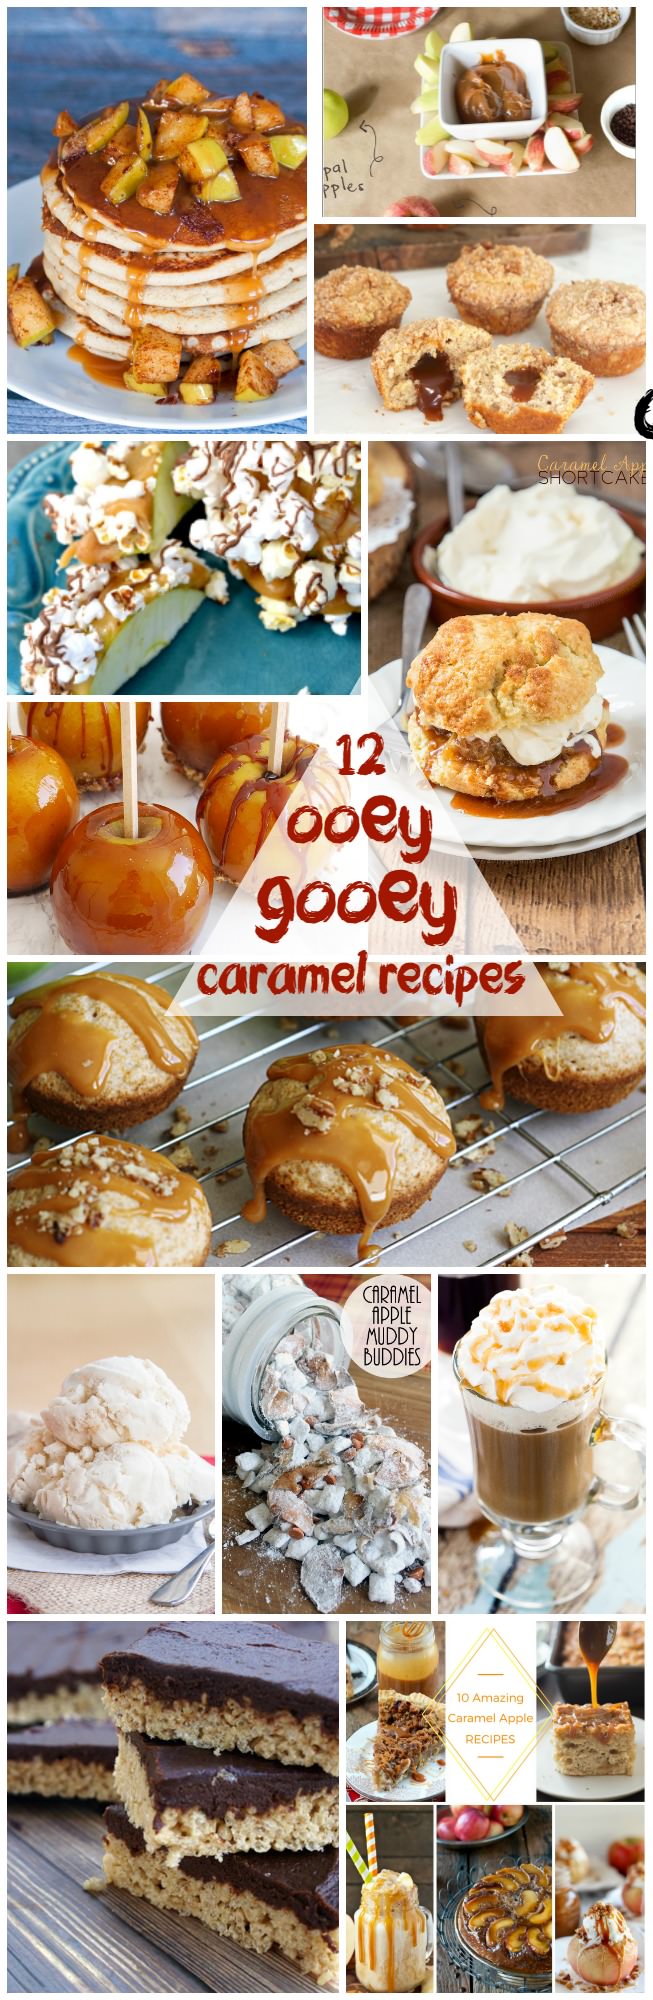 12 amazing ooey-gooey Caramel Recipes that you can make at home! From apples to shortcake, pancakes and muffins - this collection has it all!